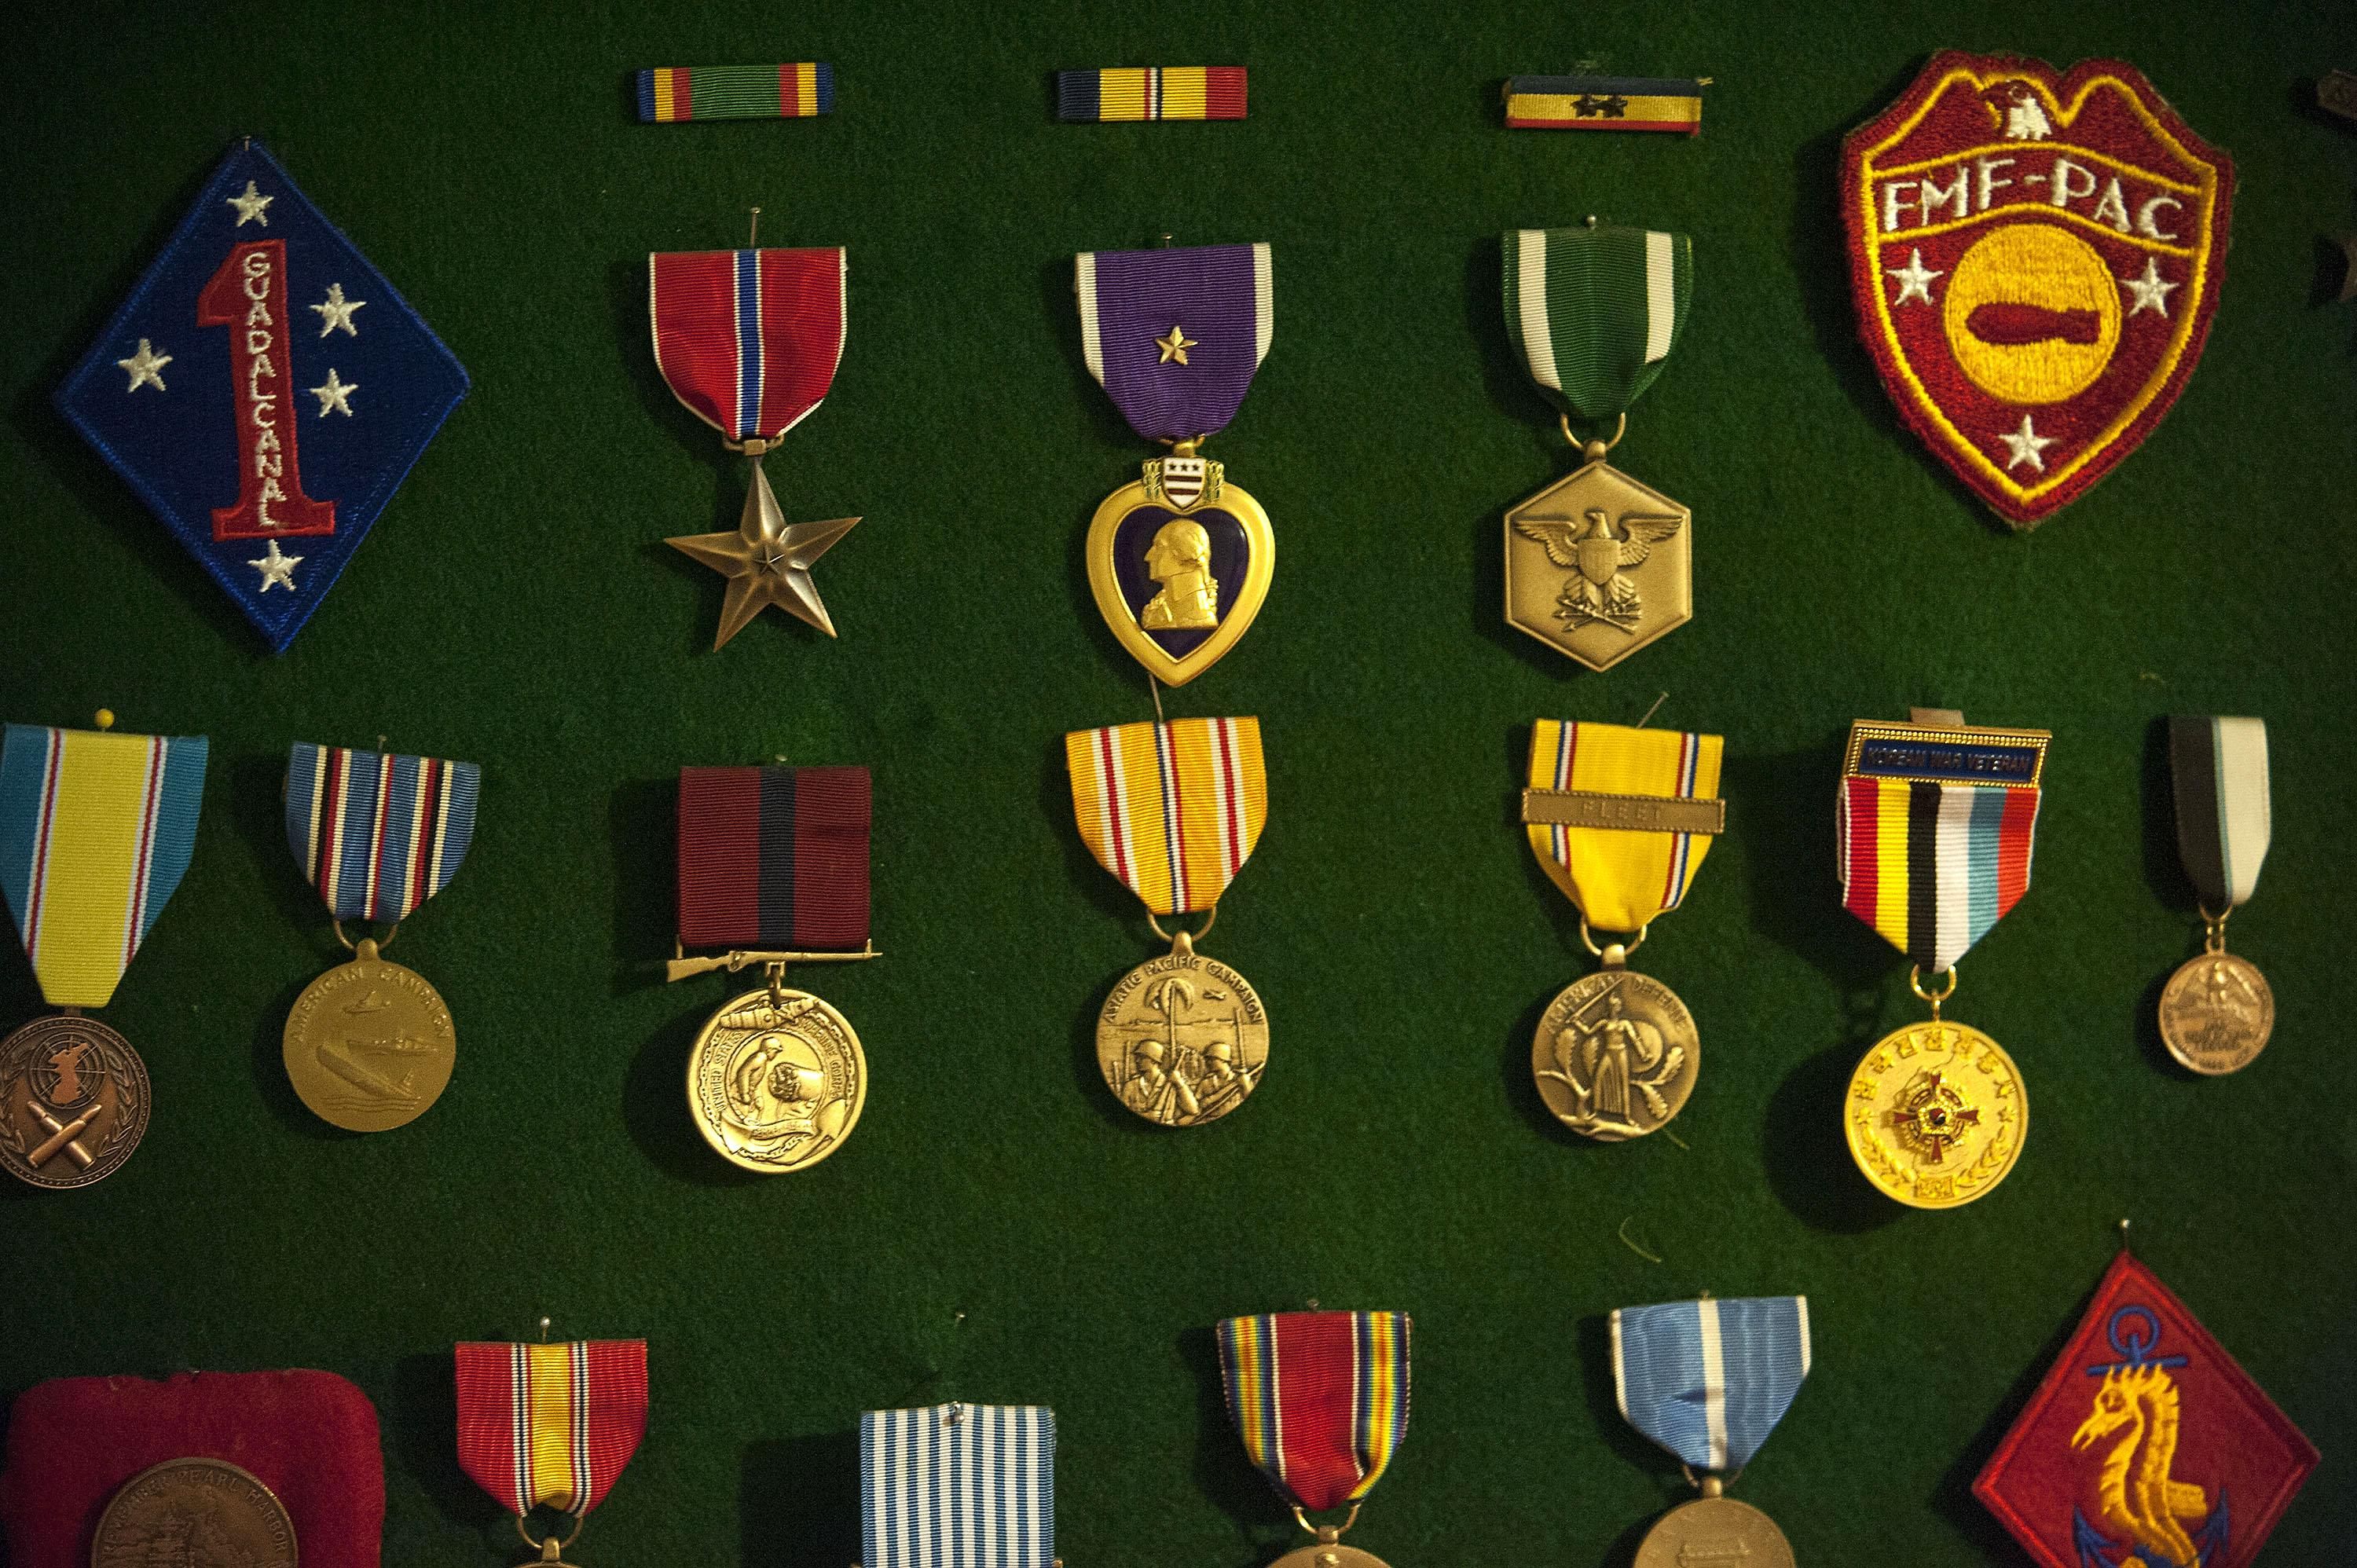 Pearl Harbor survivor Ray Garland's medals are on display in the basement of his home in Coeur d'Alene on July 8, 2016. (Kathy Plonka / The Spokesman-Review)